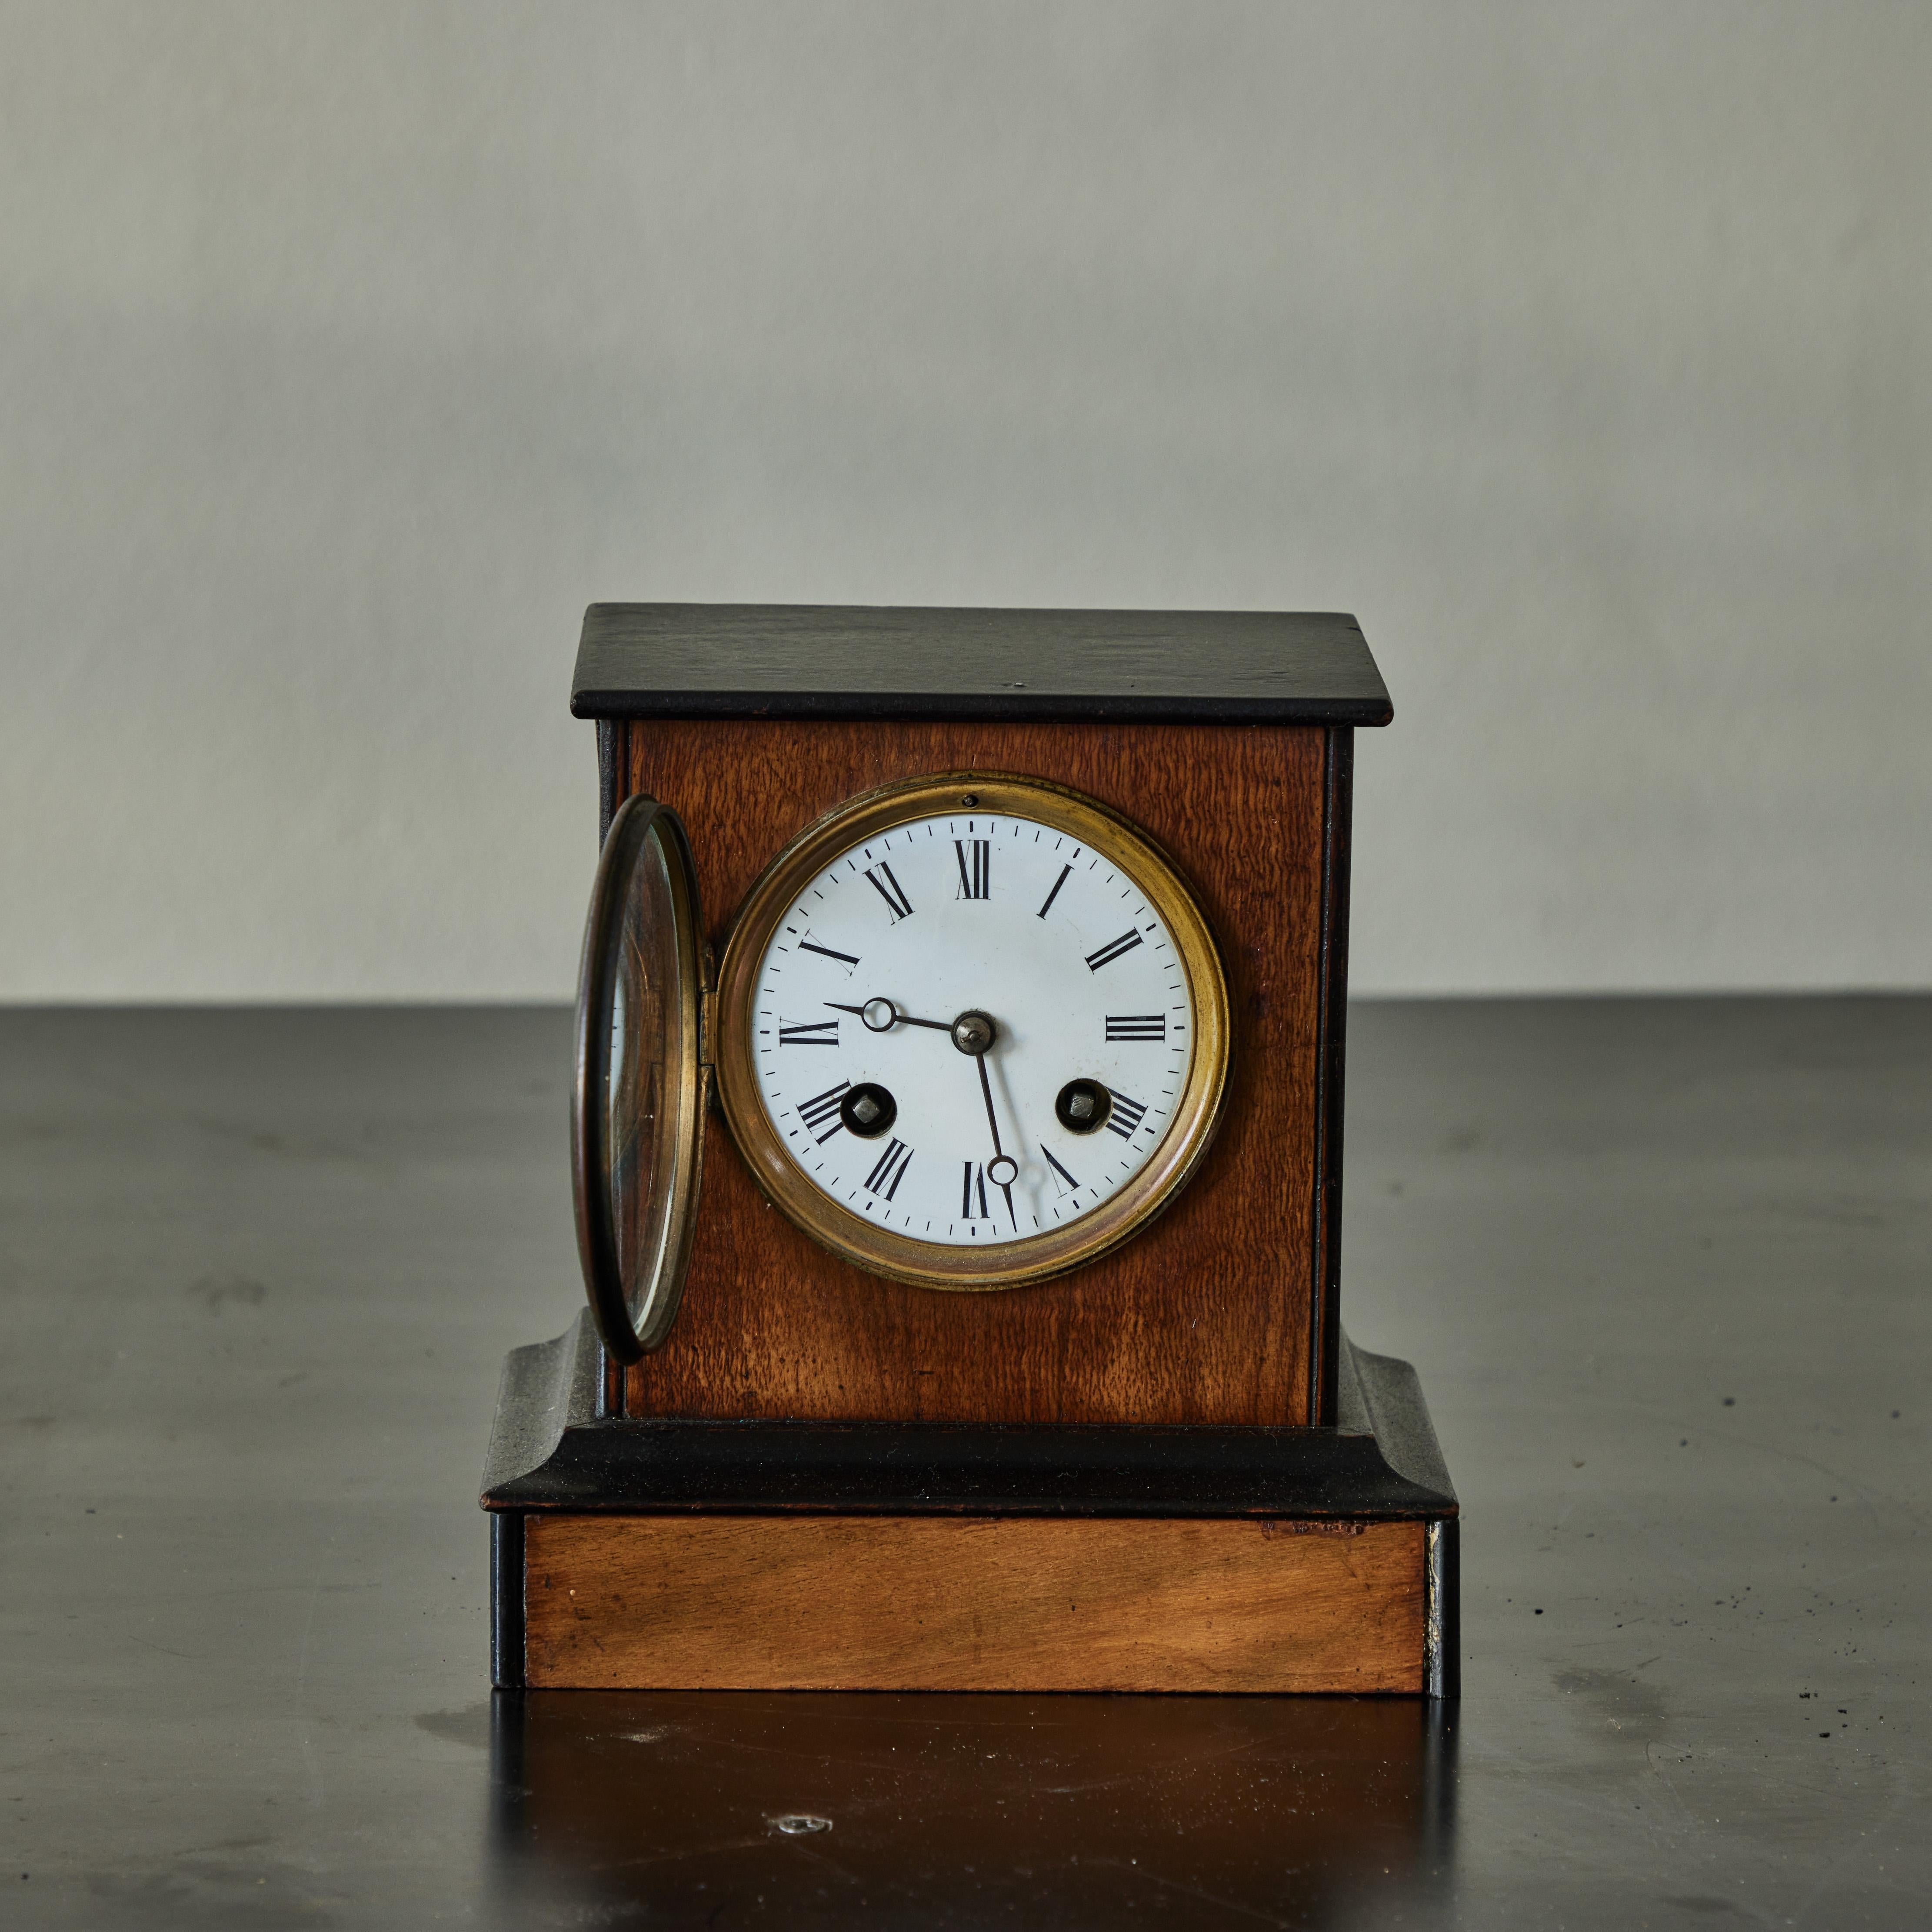 Decorative walnut wood mantle clock from Victorian England. Simple yet refined, the piece features a raised pedestal base, ebonized trim, and glass-fronted white enamel clock-face with delicate Roman numeral lettering. 

England, circa